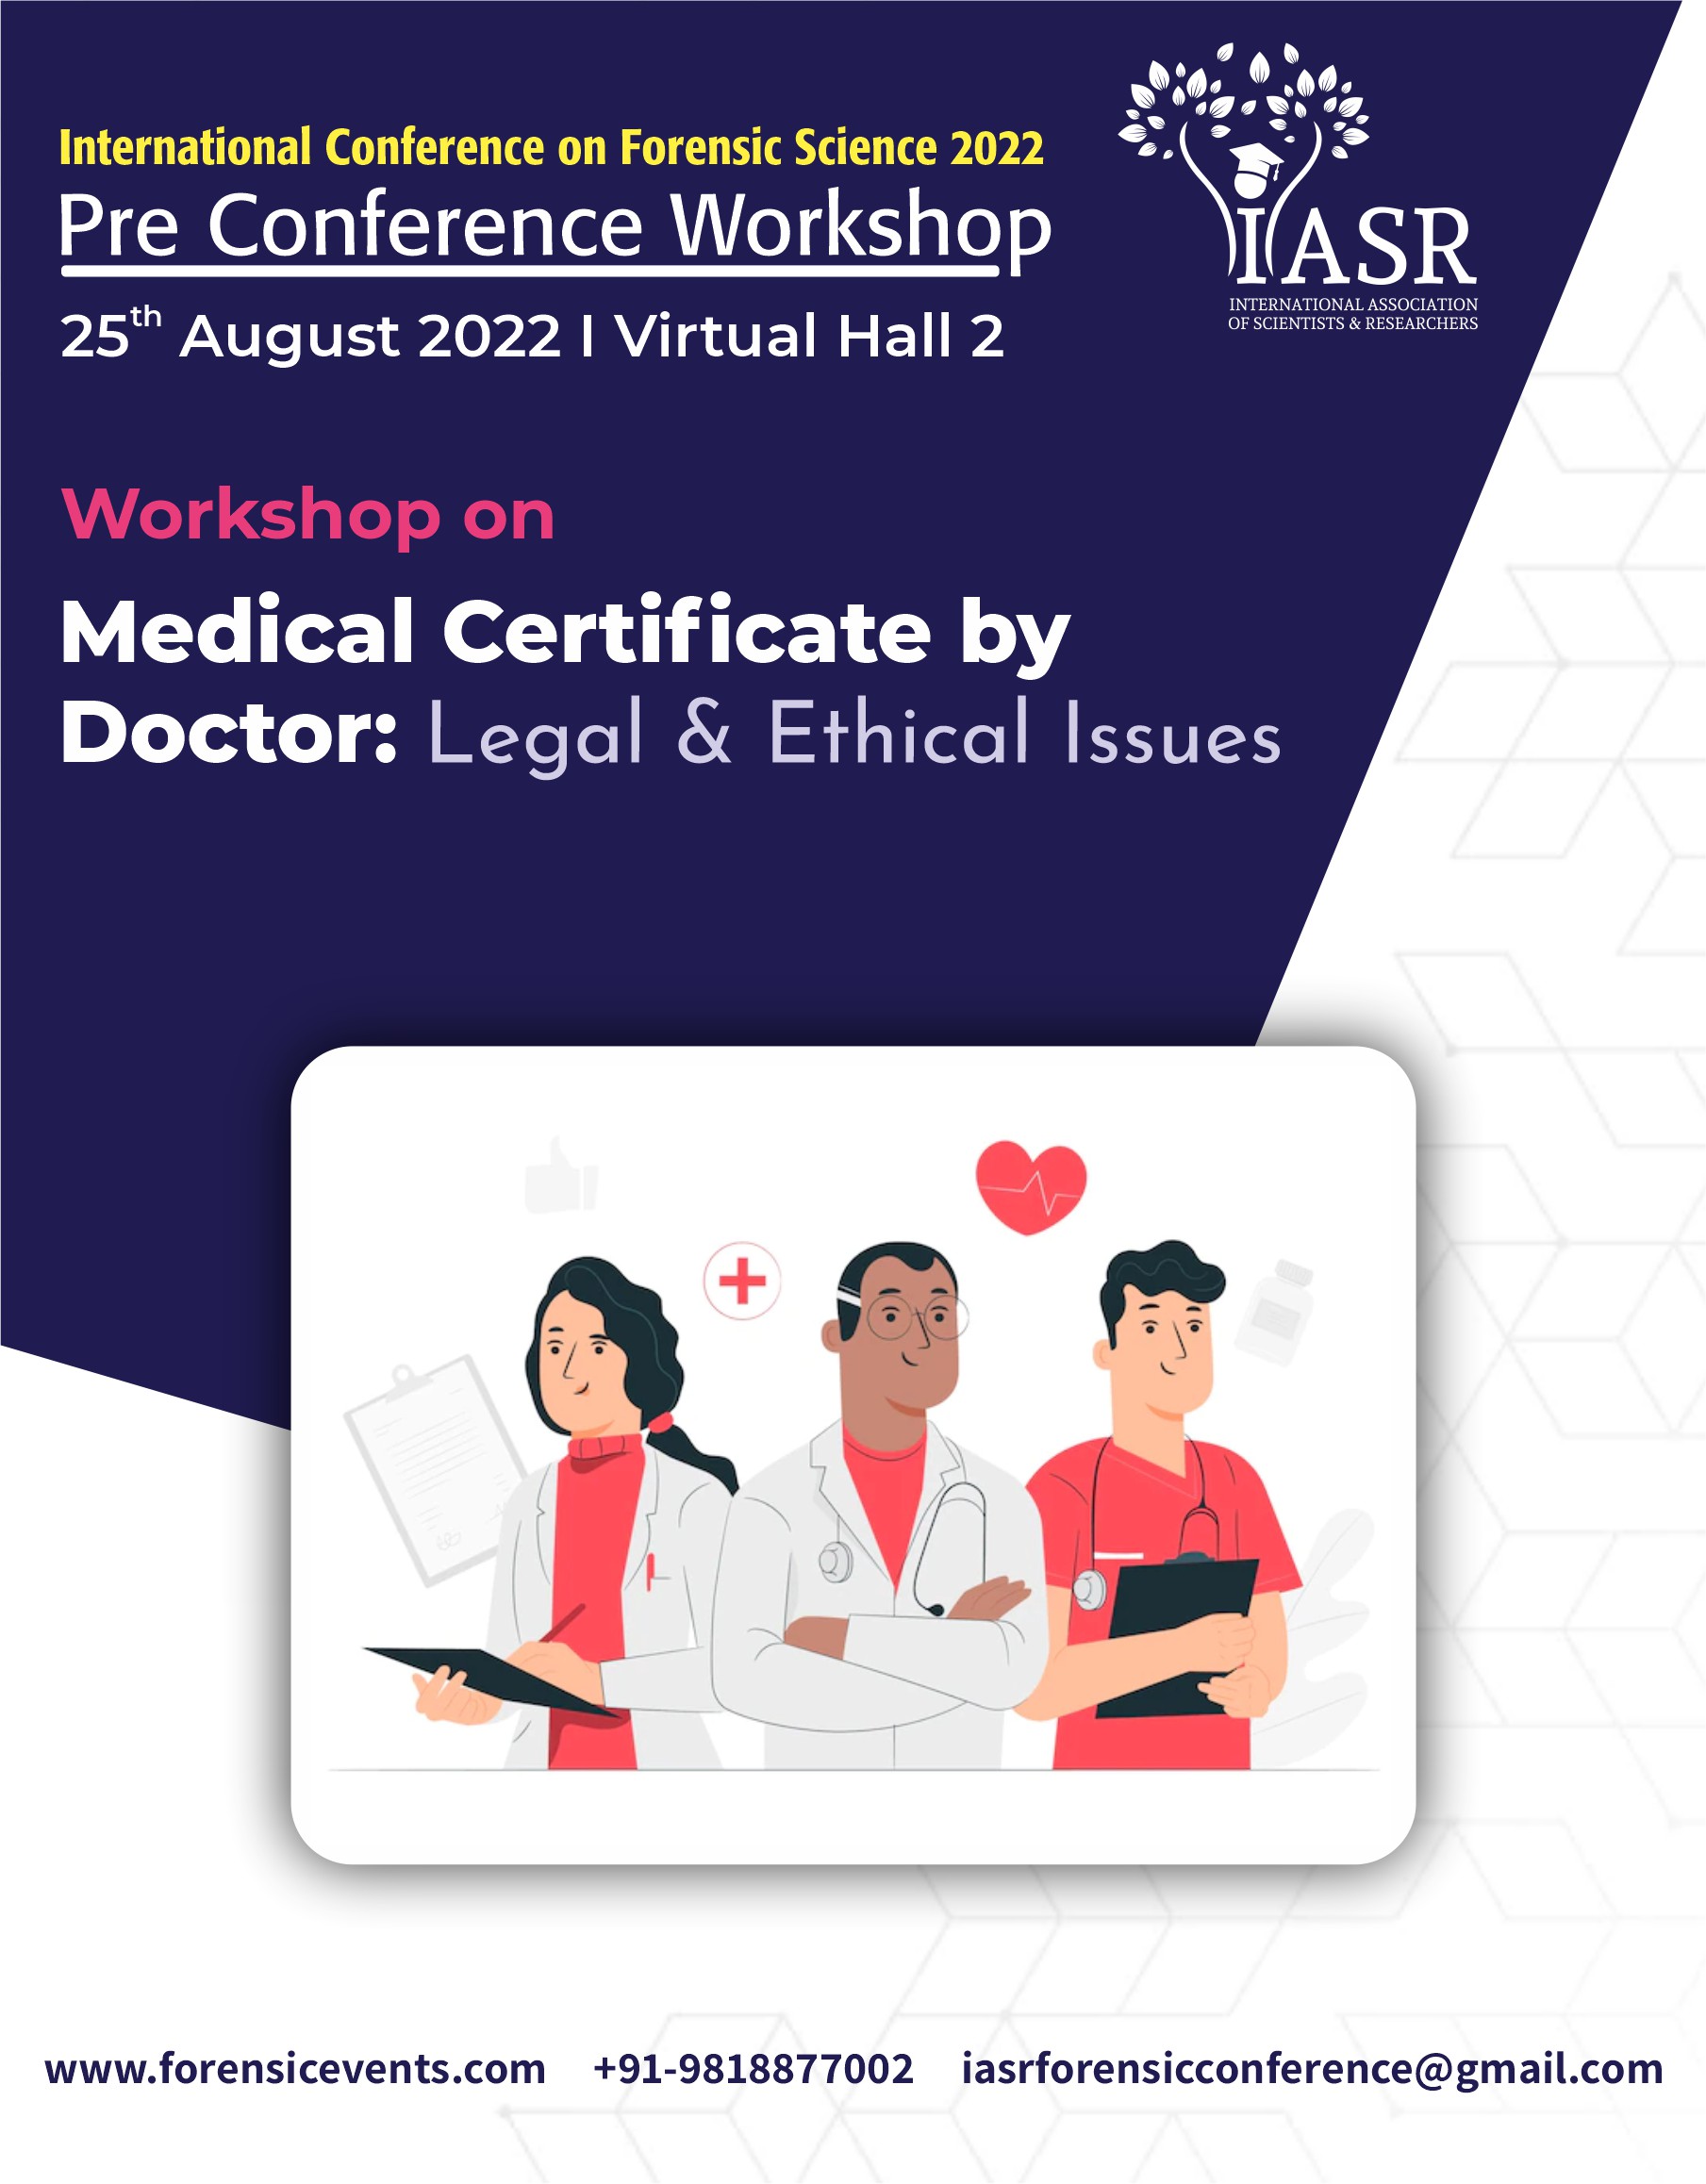 Medical Certificate by Doctor: Legal and Ethical Issues